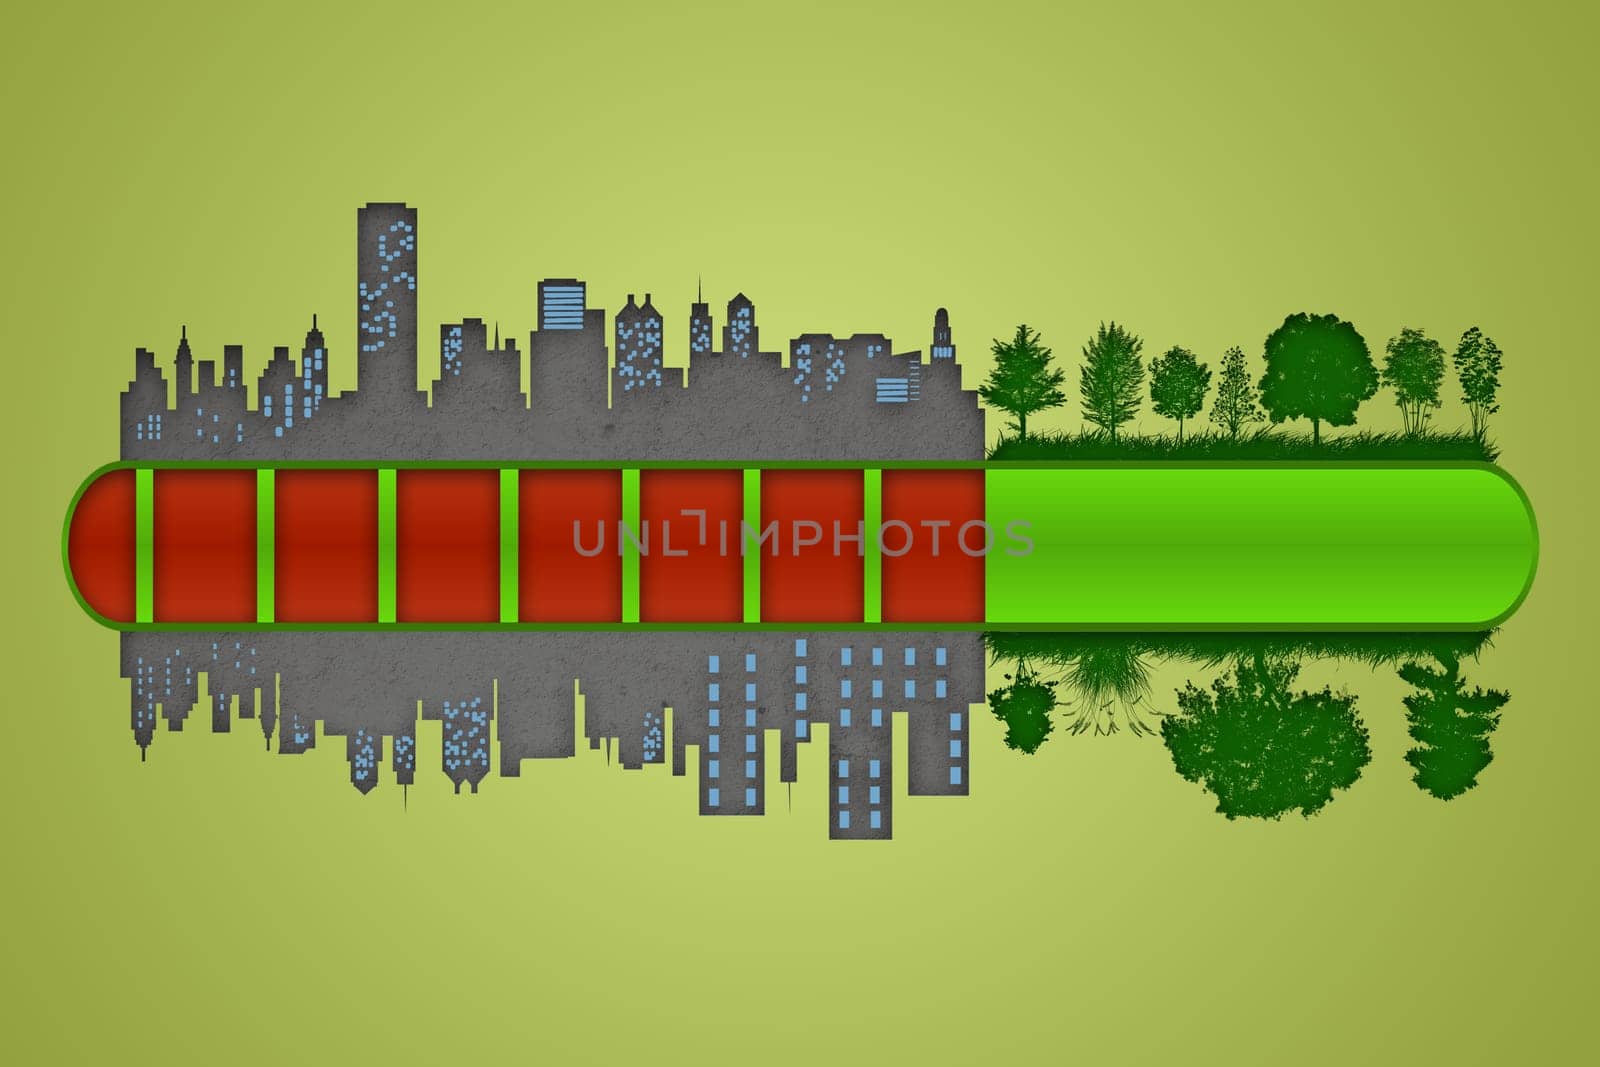 Environment and ecology concept. Loading bar of city urbanization and pollution against green nature.